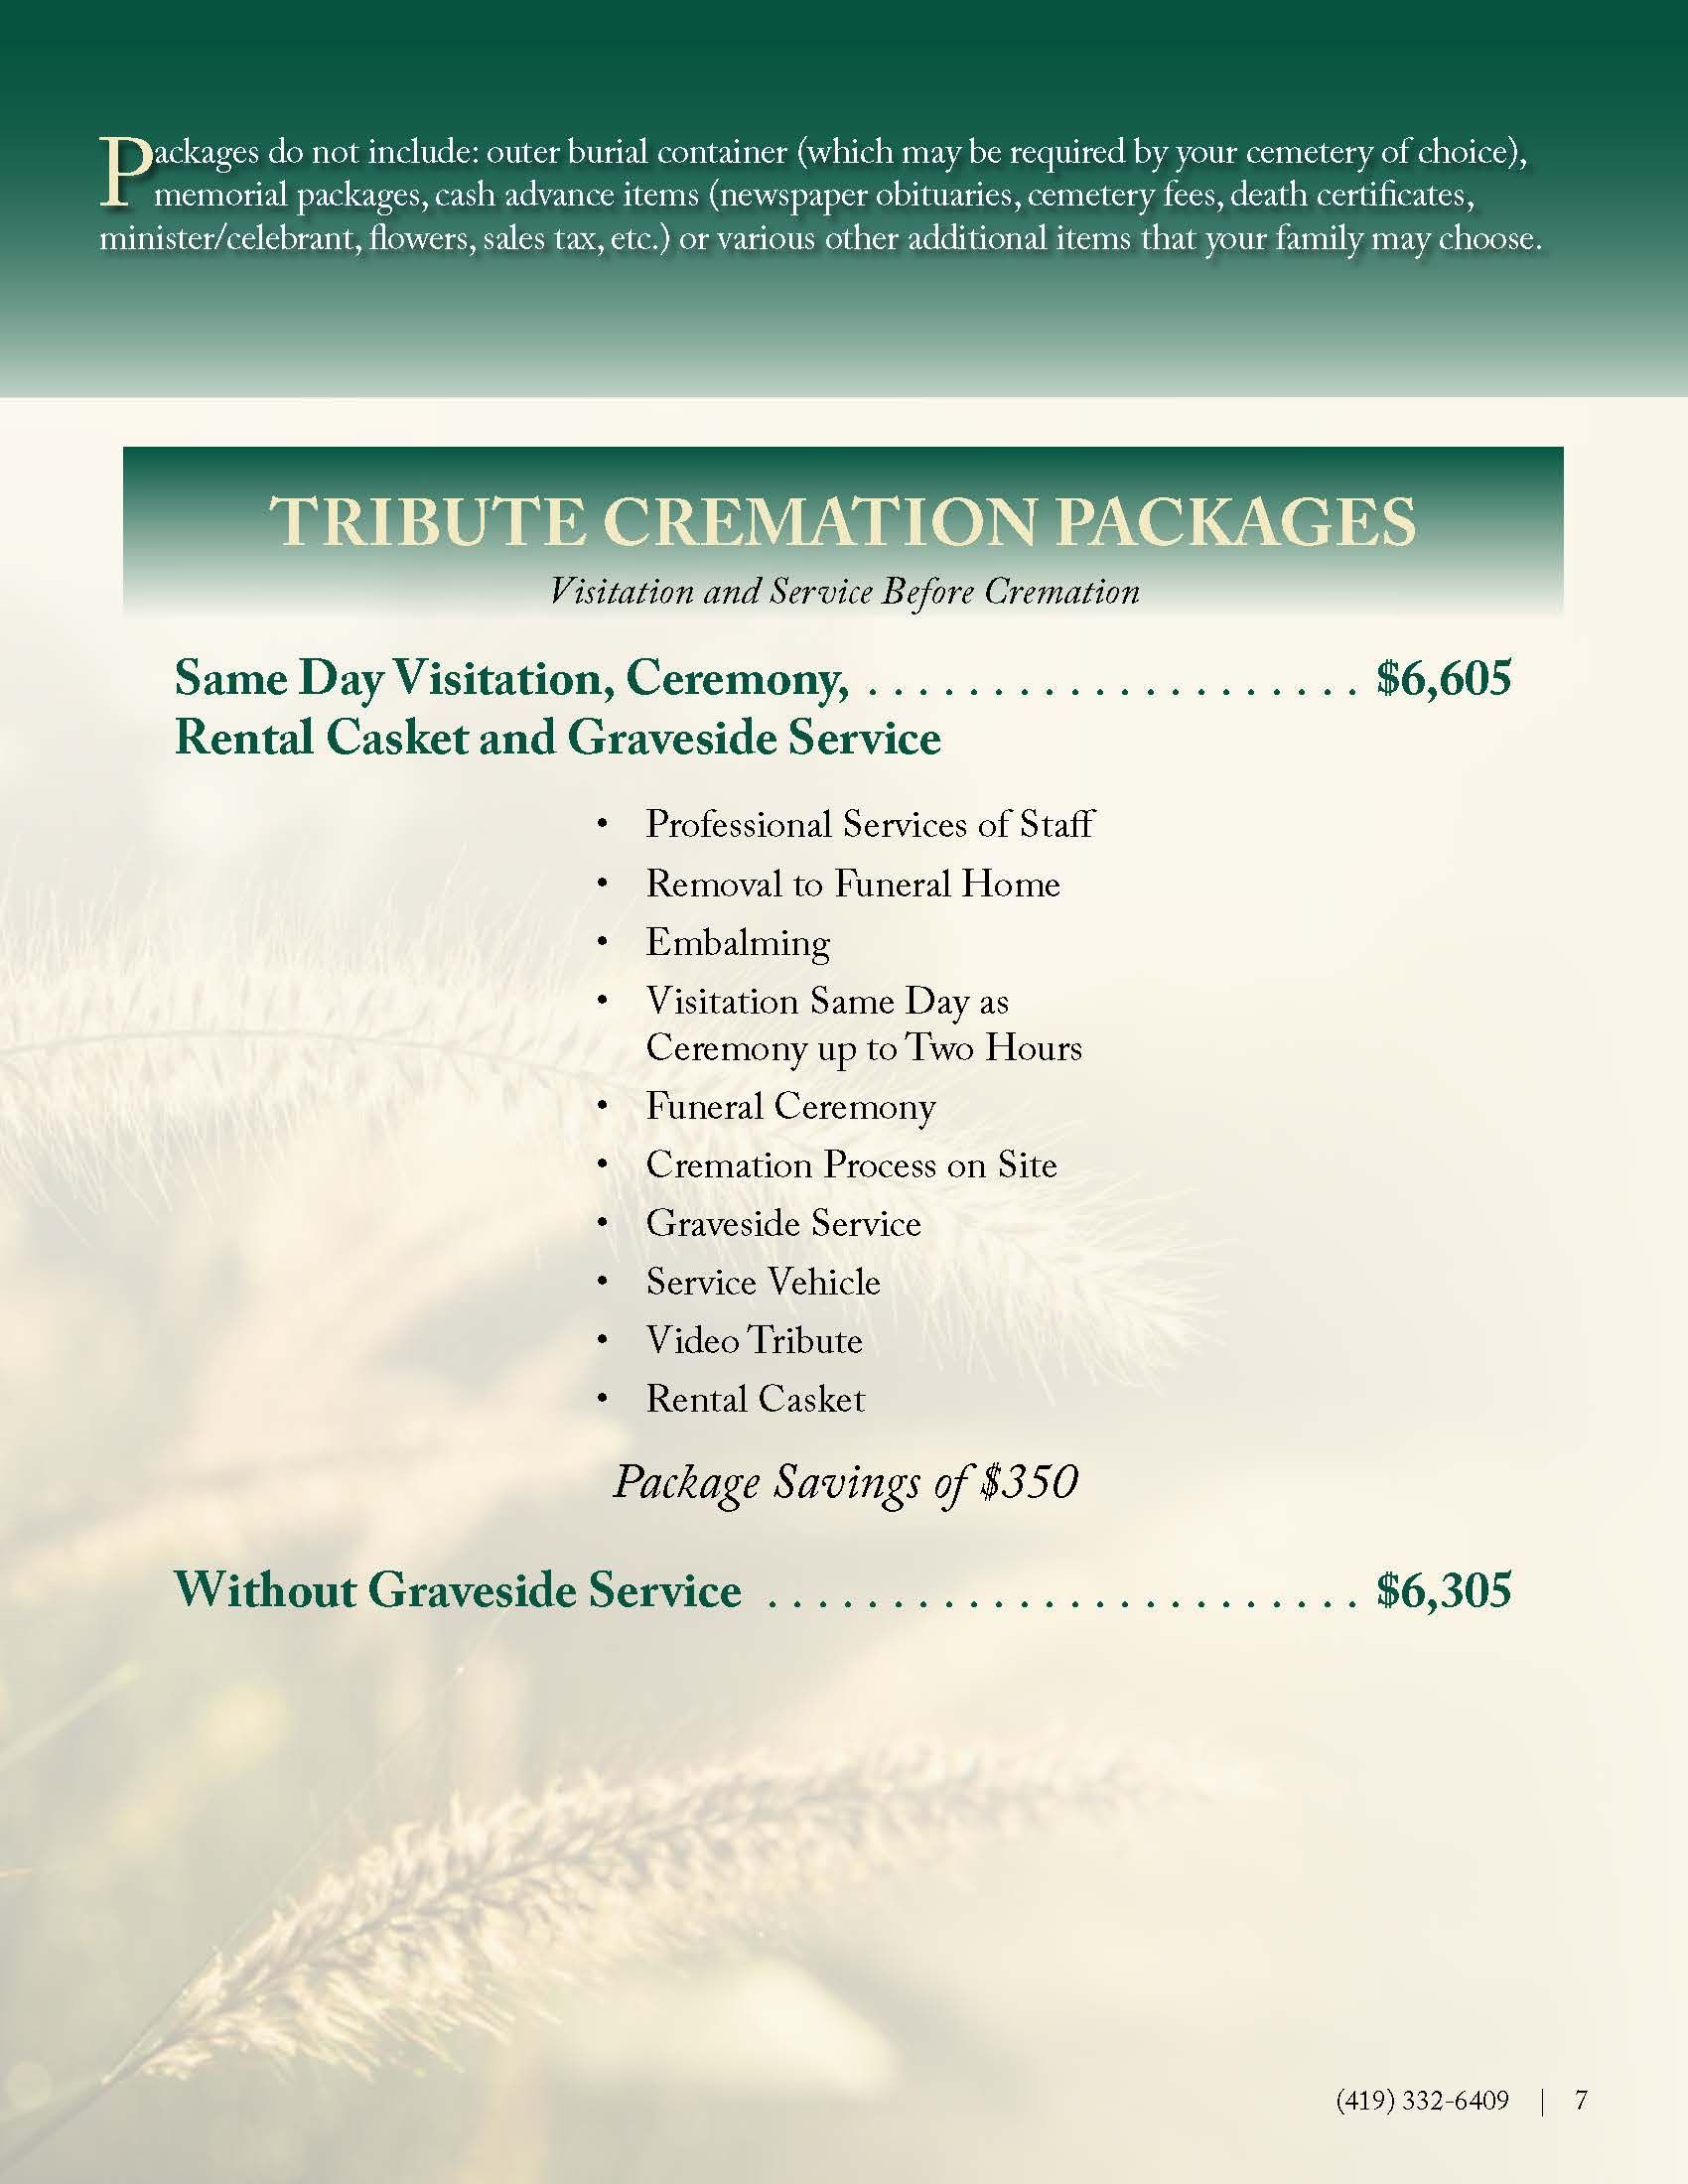 Cremation After Services Packages Page